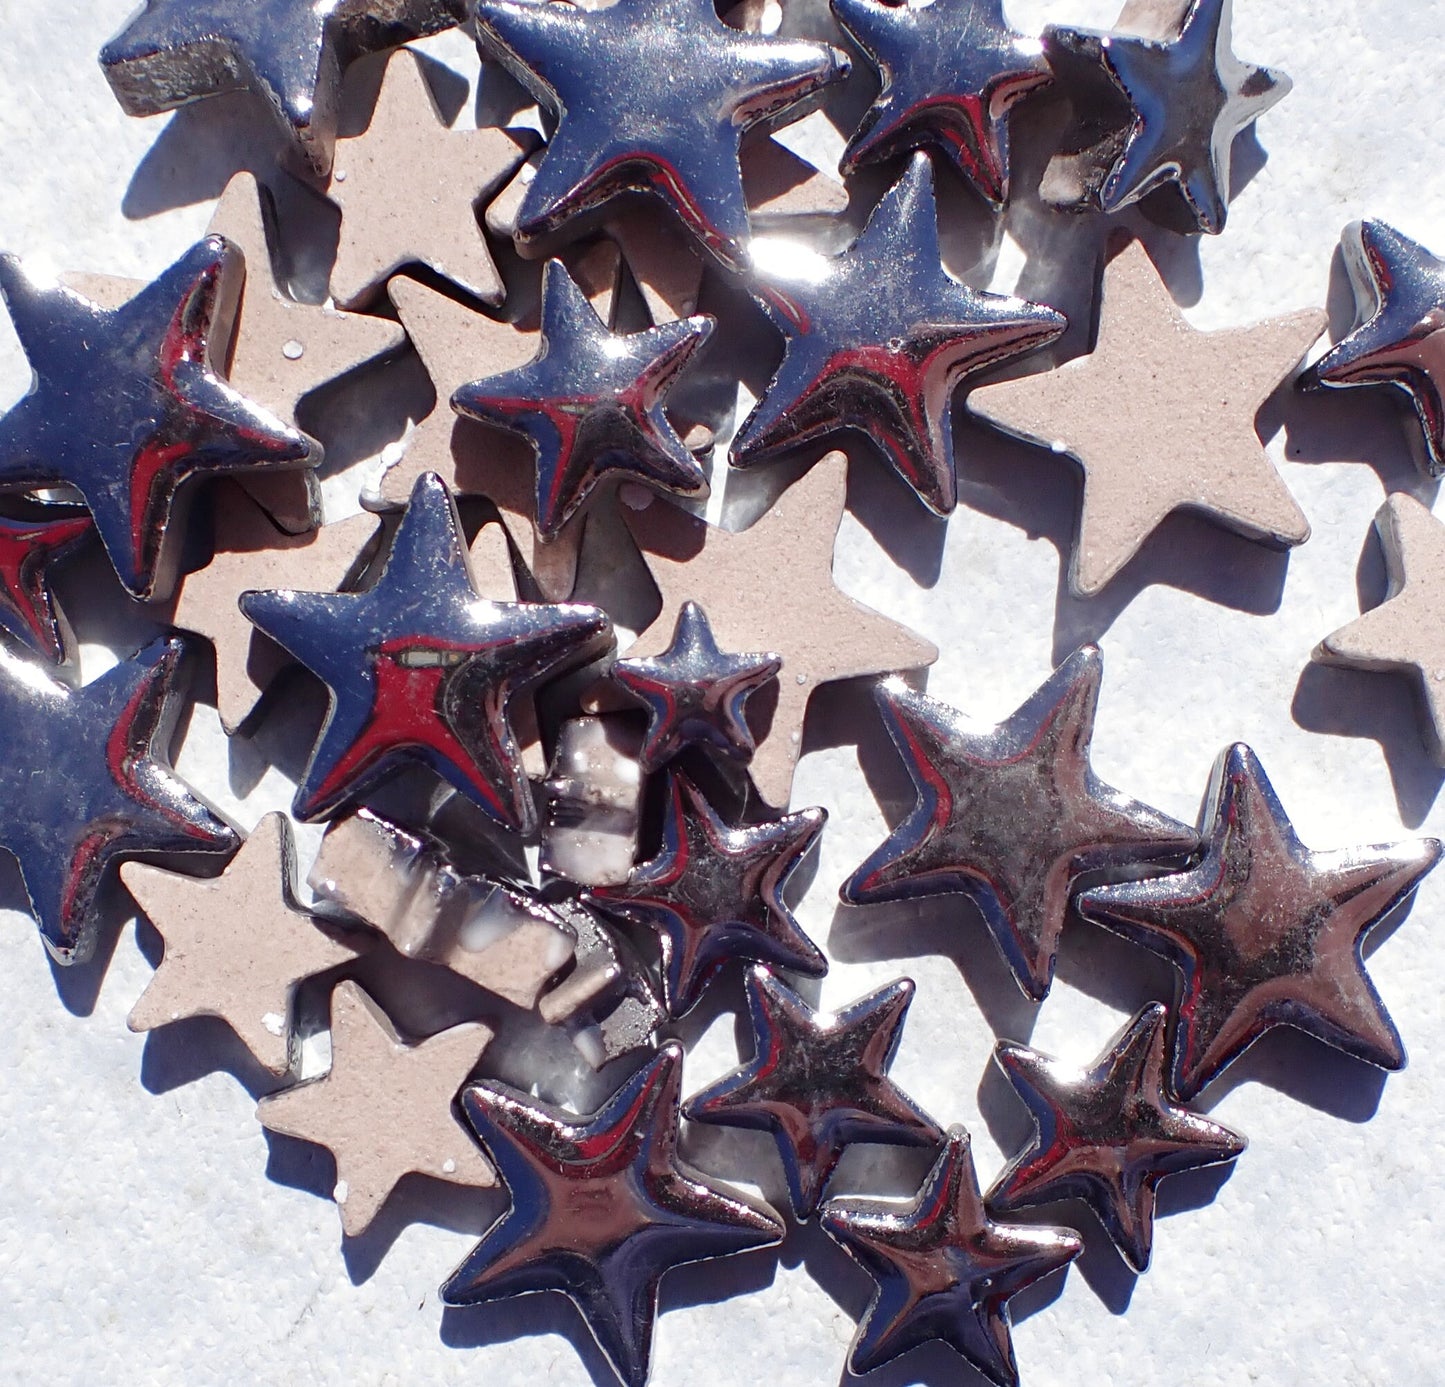 Silver Stars Mosaic Tiles - 50g Ceramic in Mix of 3 Sizes - 20mm, 15mm, 10mm